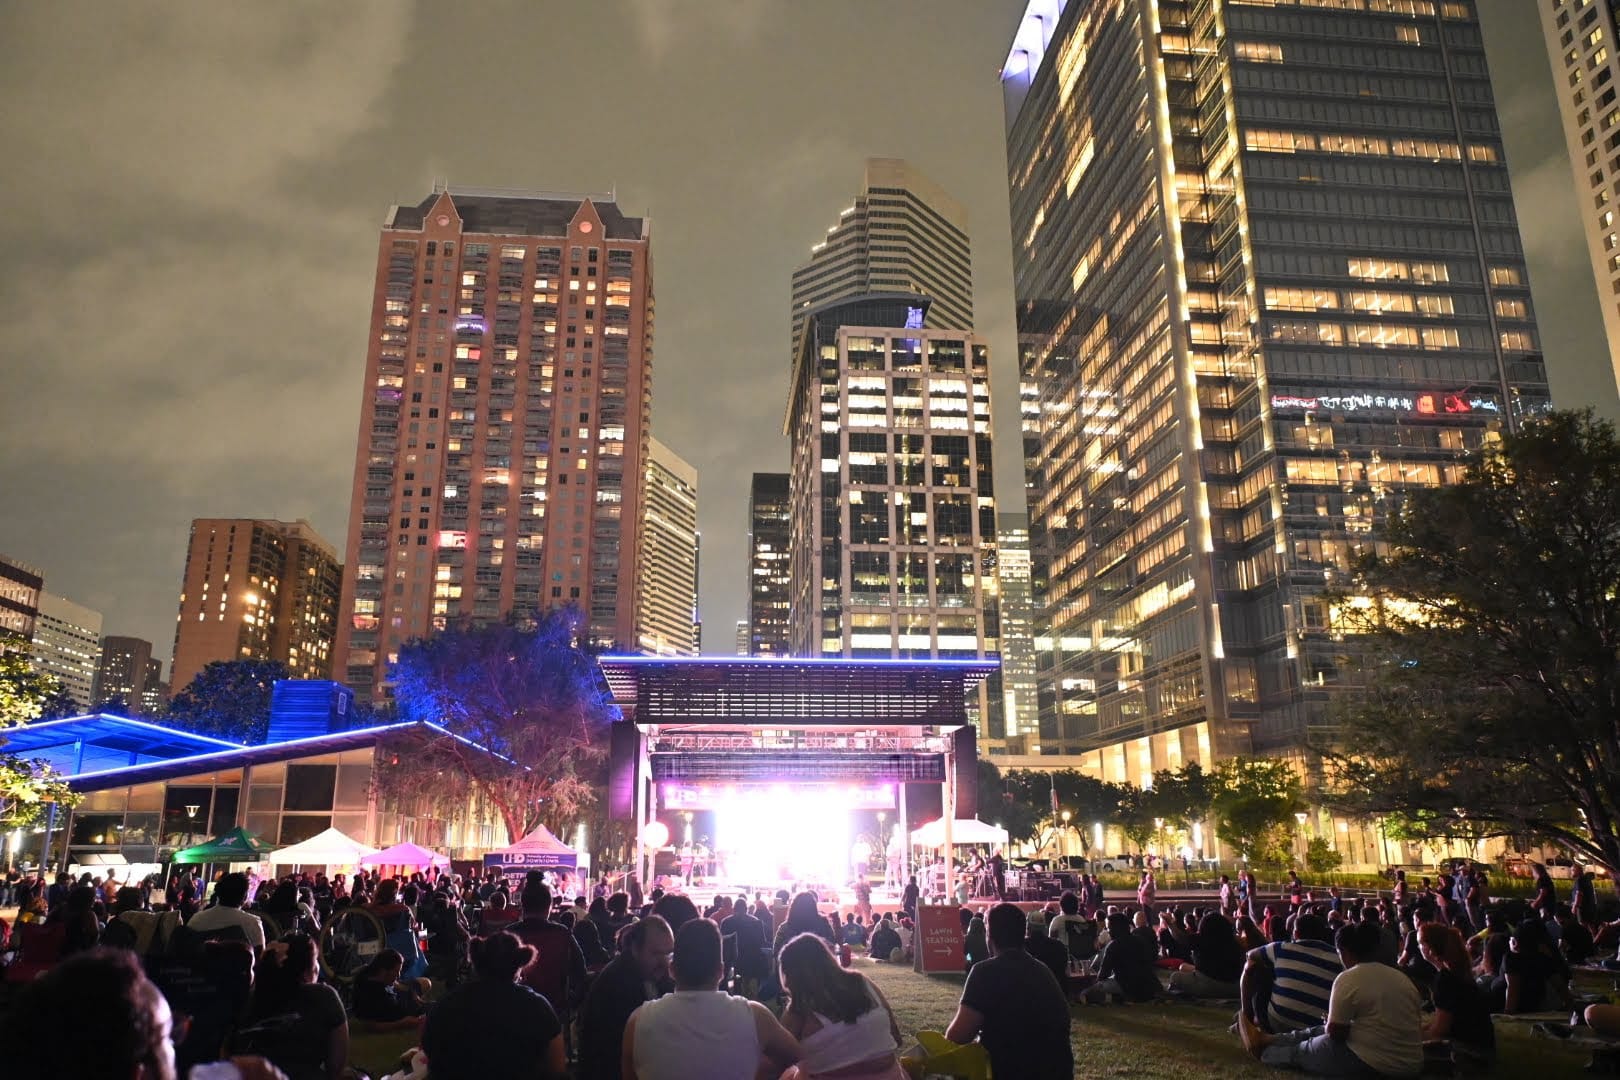 The Anheuser-Busch stage in the middle of downtown Houston will be the location of the Discover Houston Music Showcase